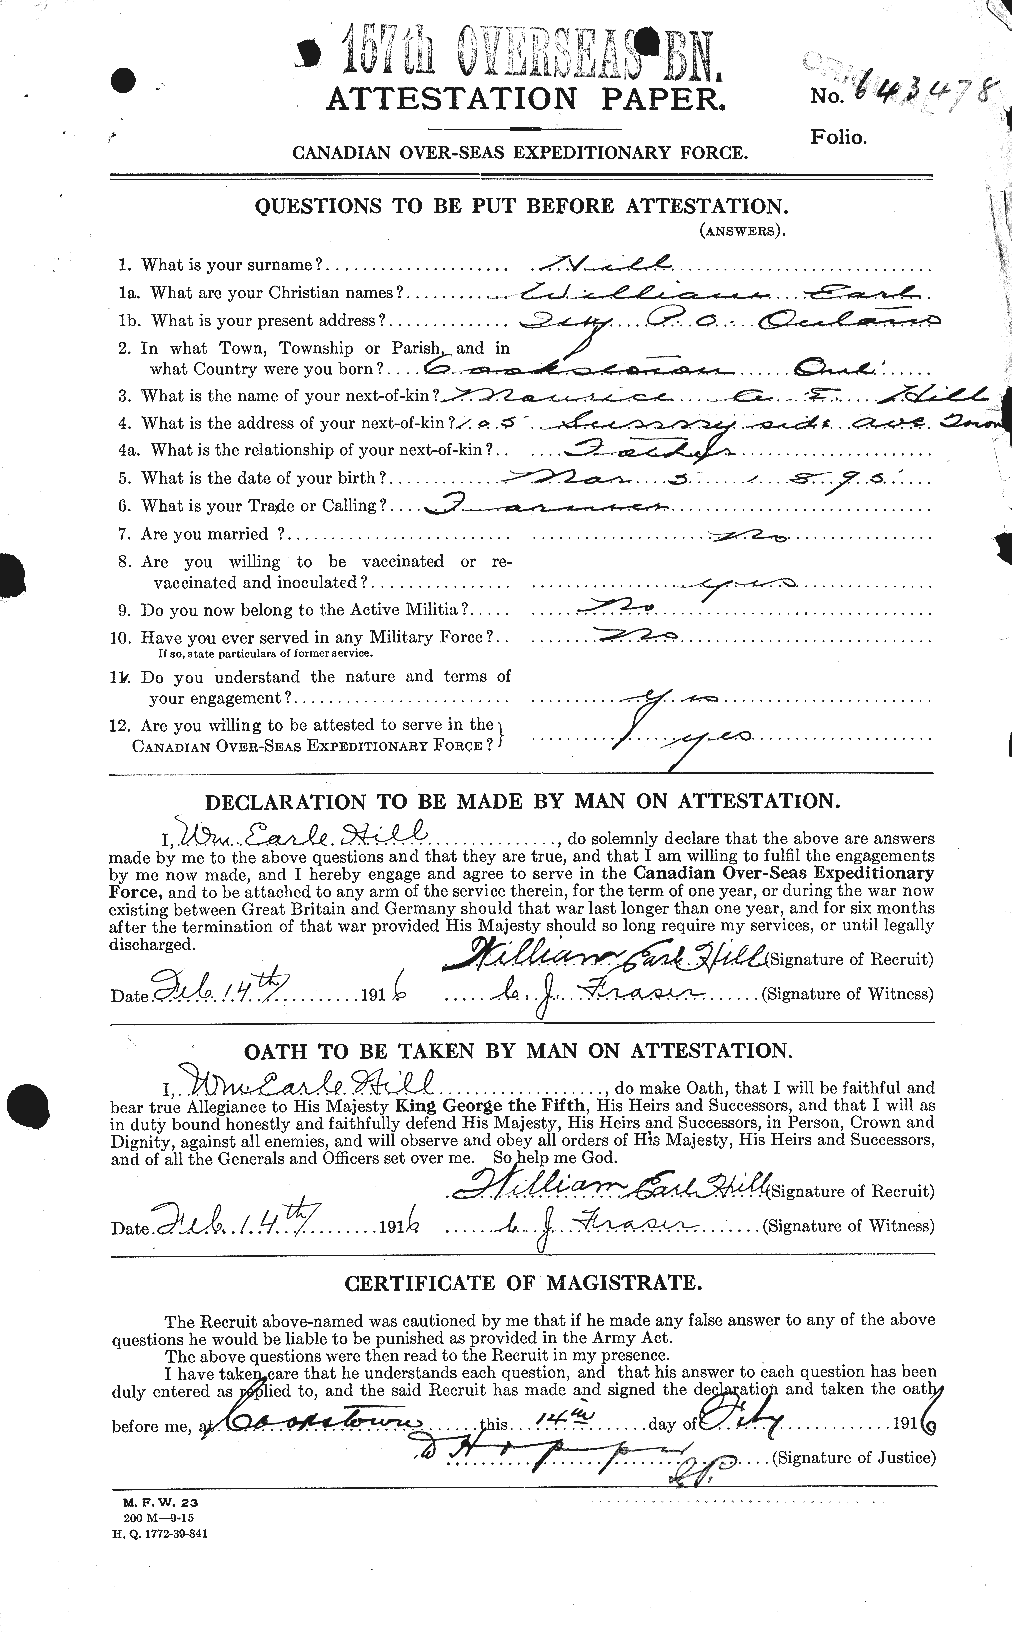 Personnel Records of the First World War - CEF 393447a